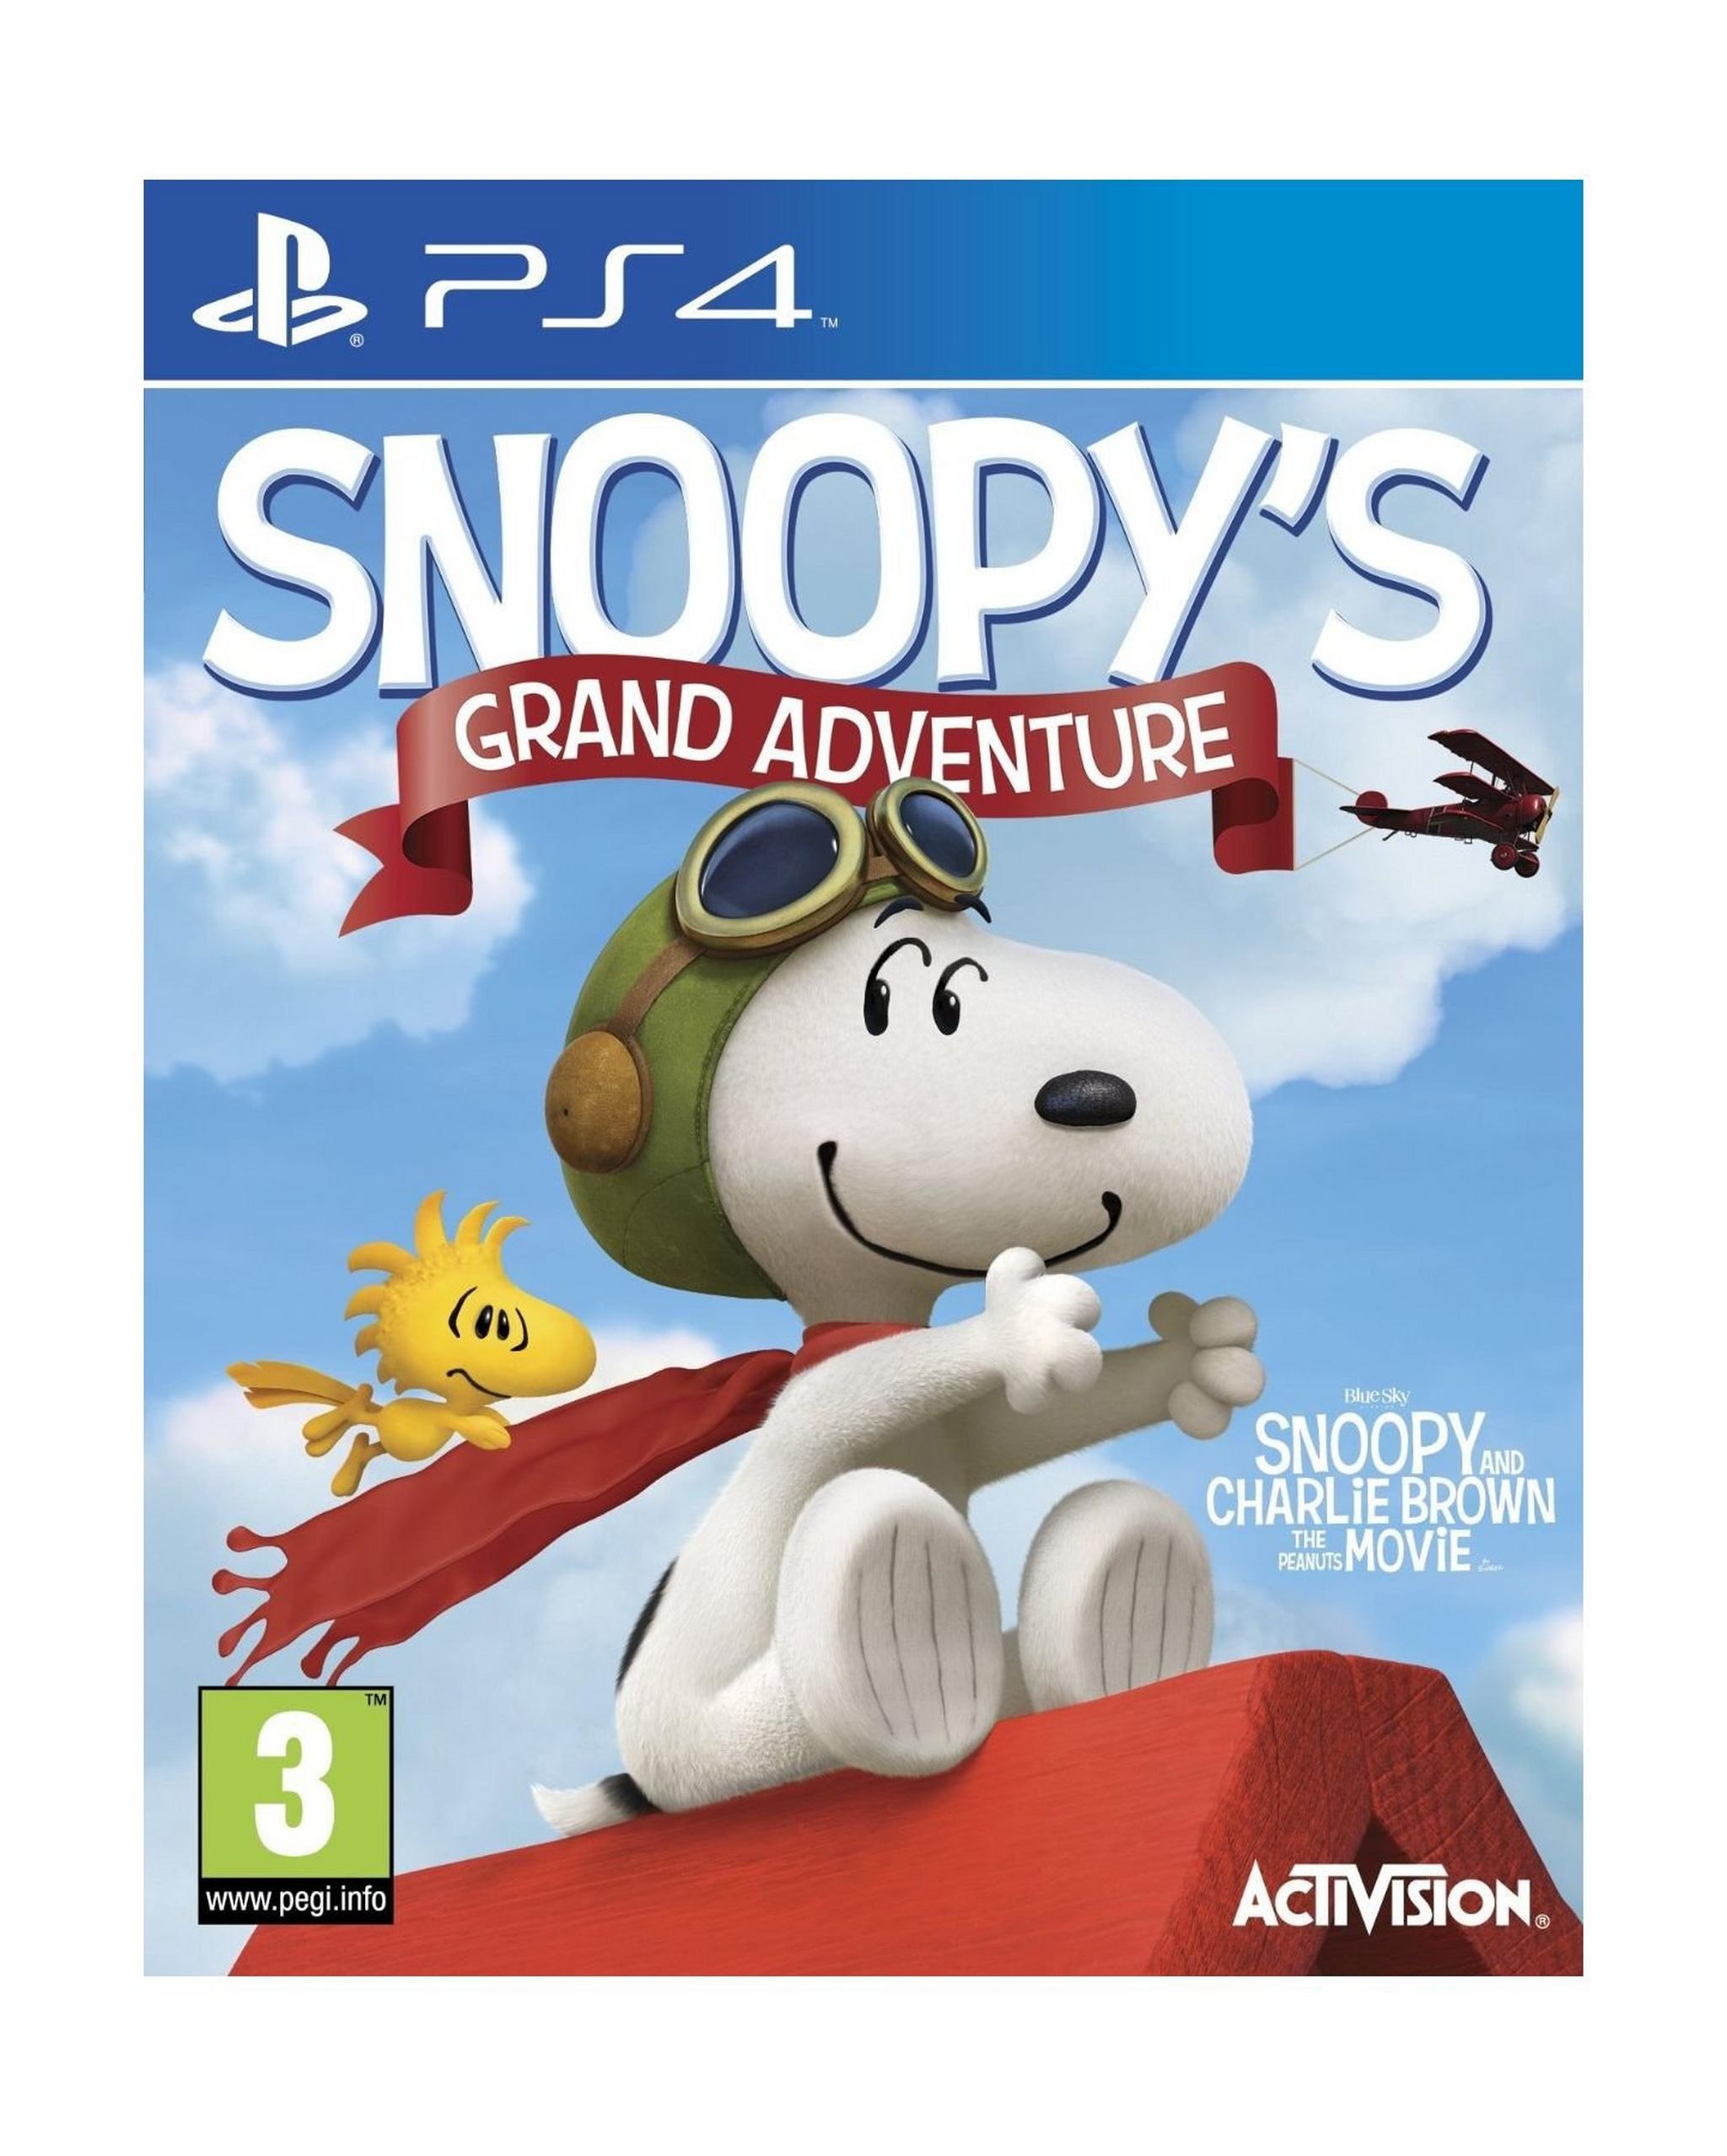 The Peanuts Movie: Snoopy's Grand Adventure - PlayStation 4 Game